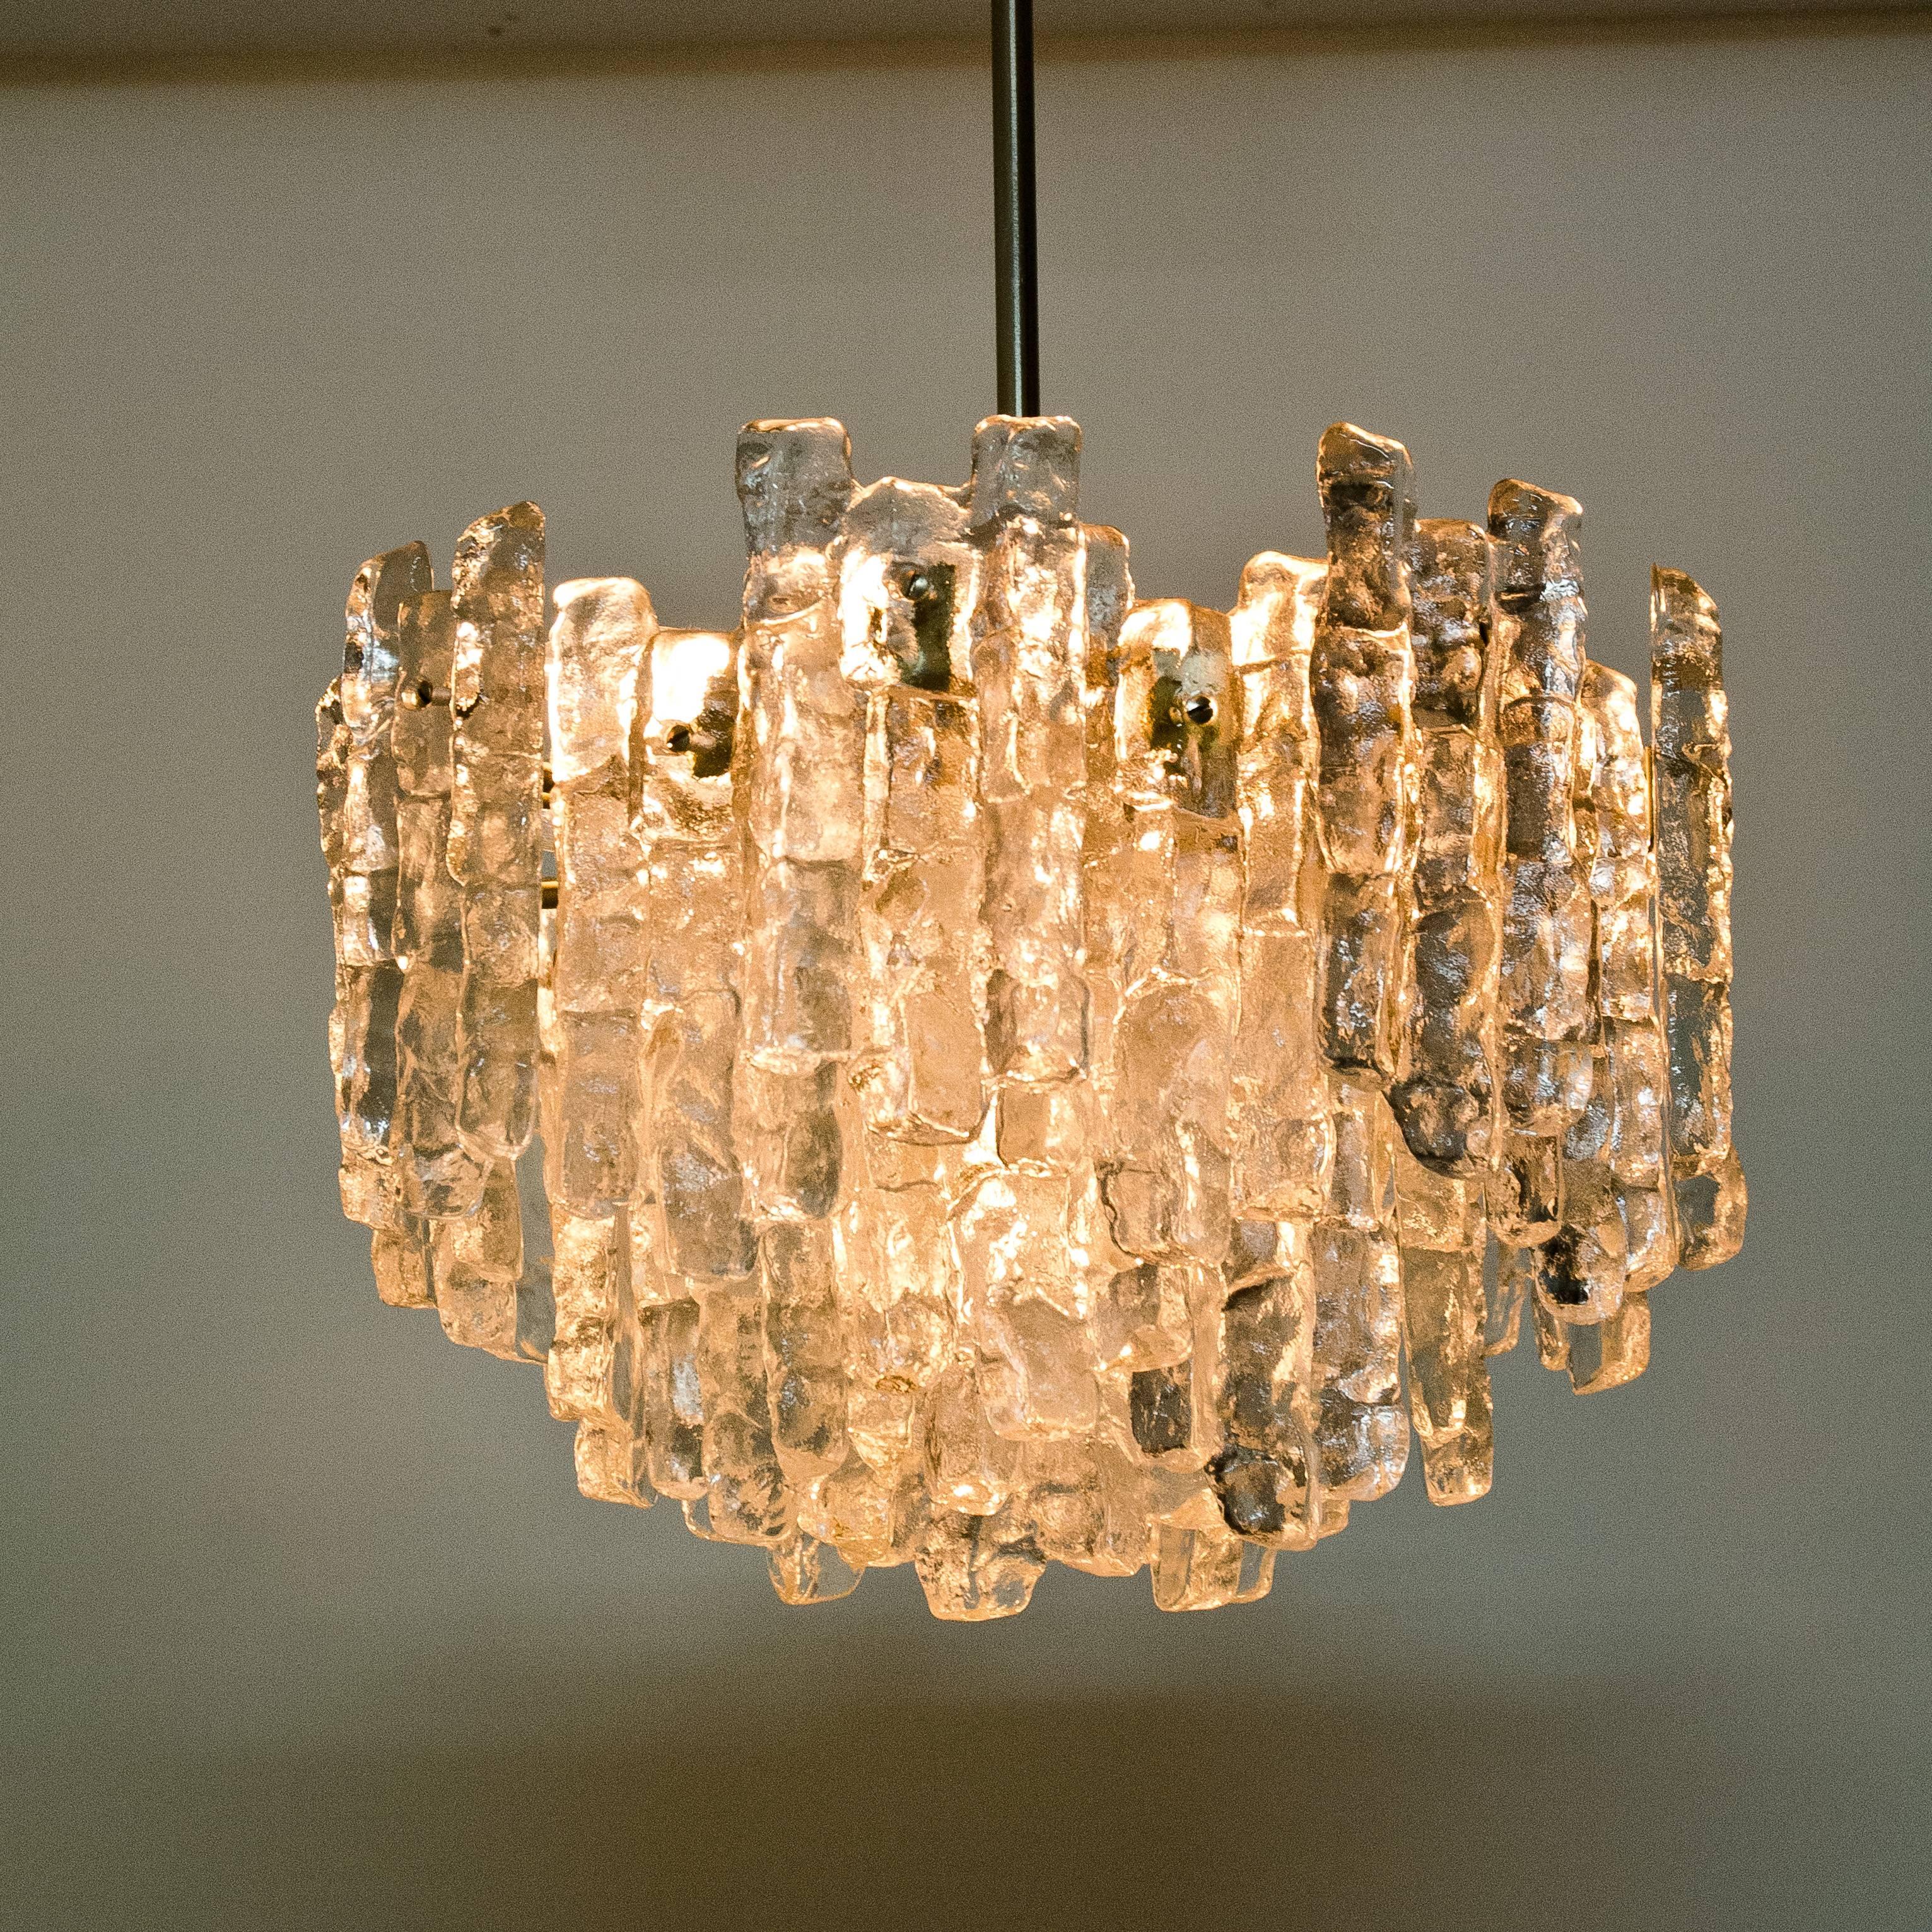 This modern chandeliers, manufactured by Kalmar Austria in the 1970s, have eight E27 sockets and three layers of textured solid ice glass sheets dangling from it. This unique chandeliers are not only functioning as light source but also as a